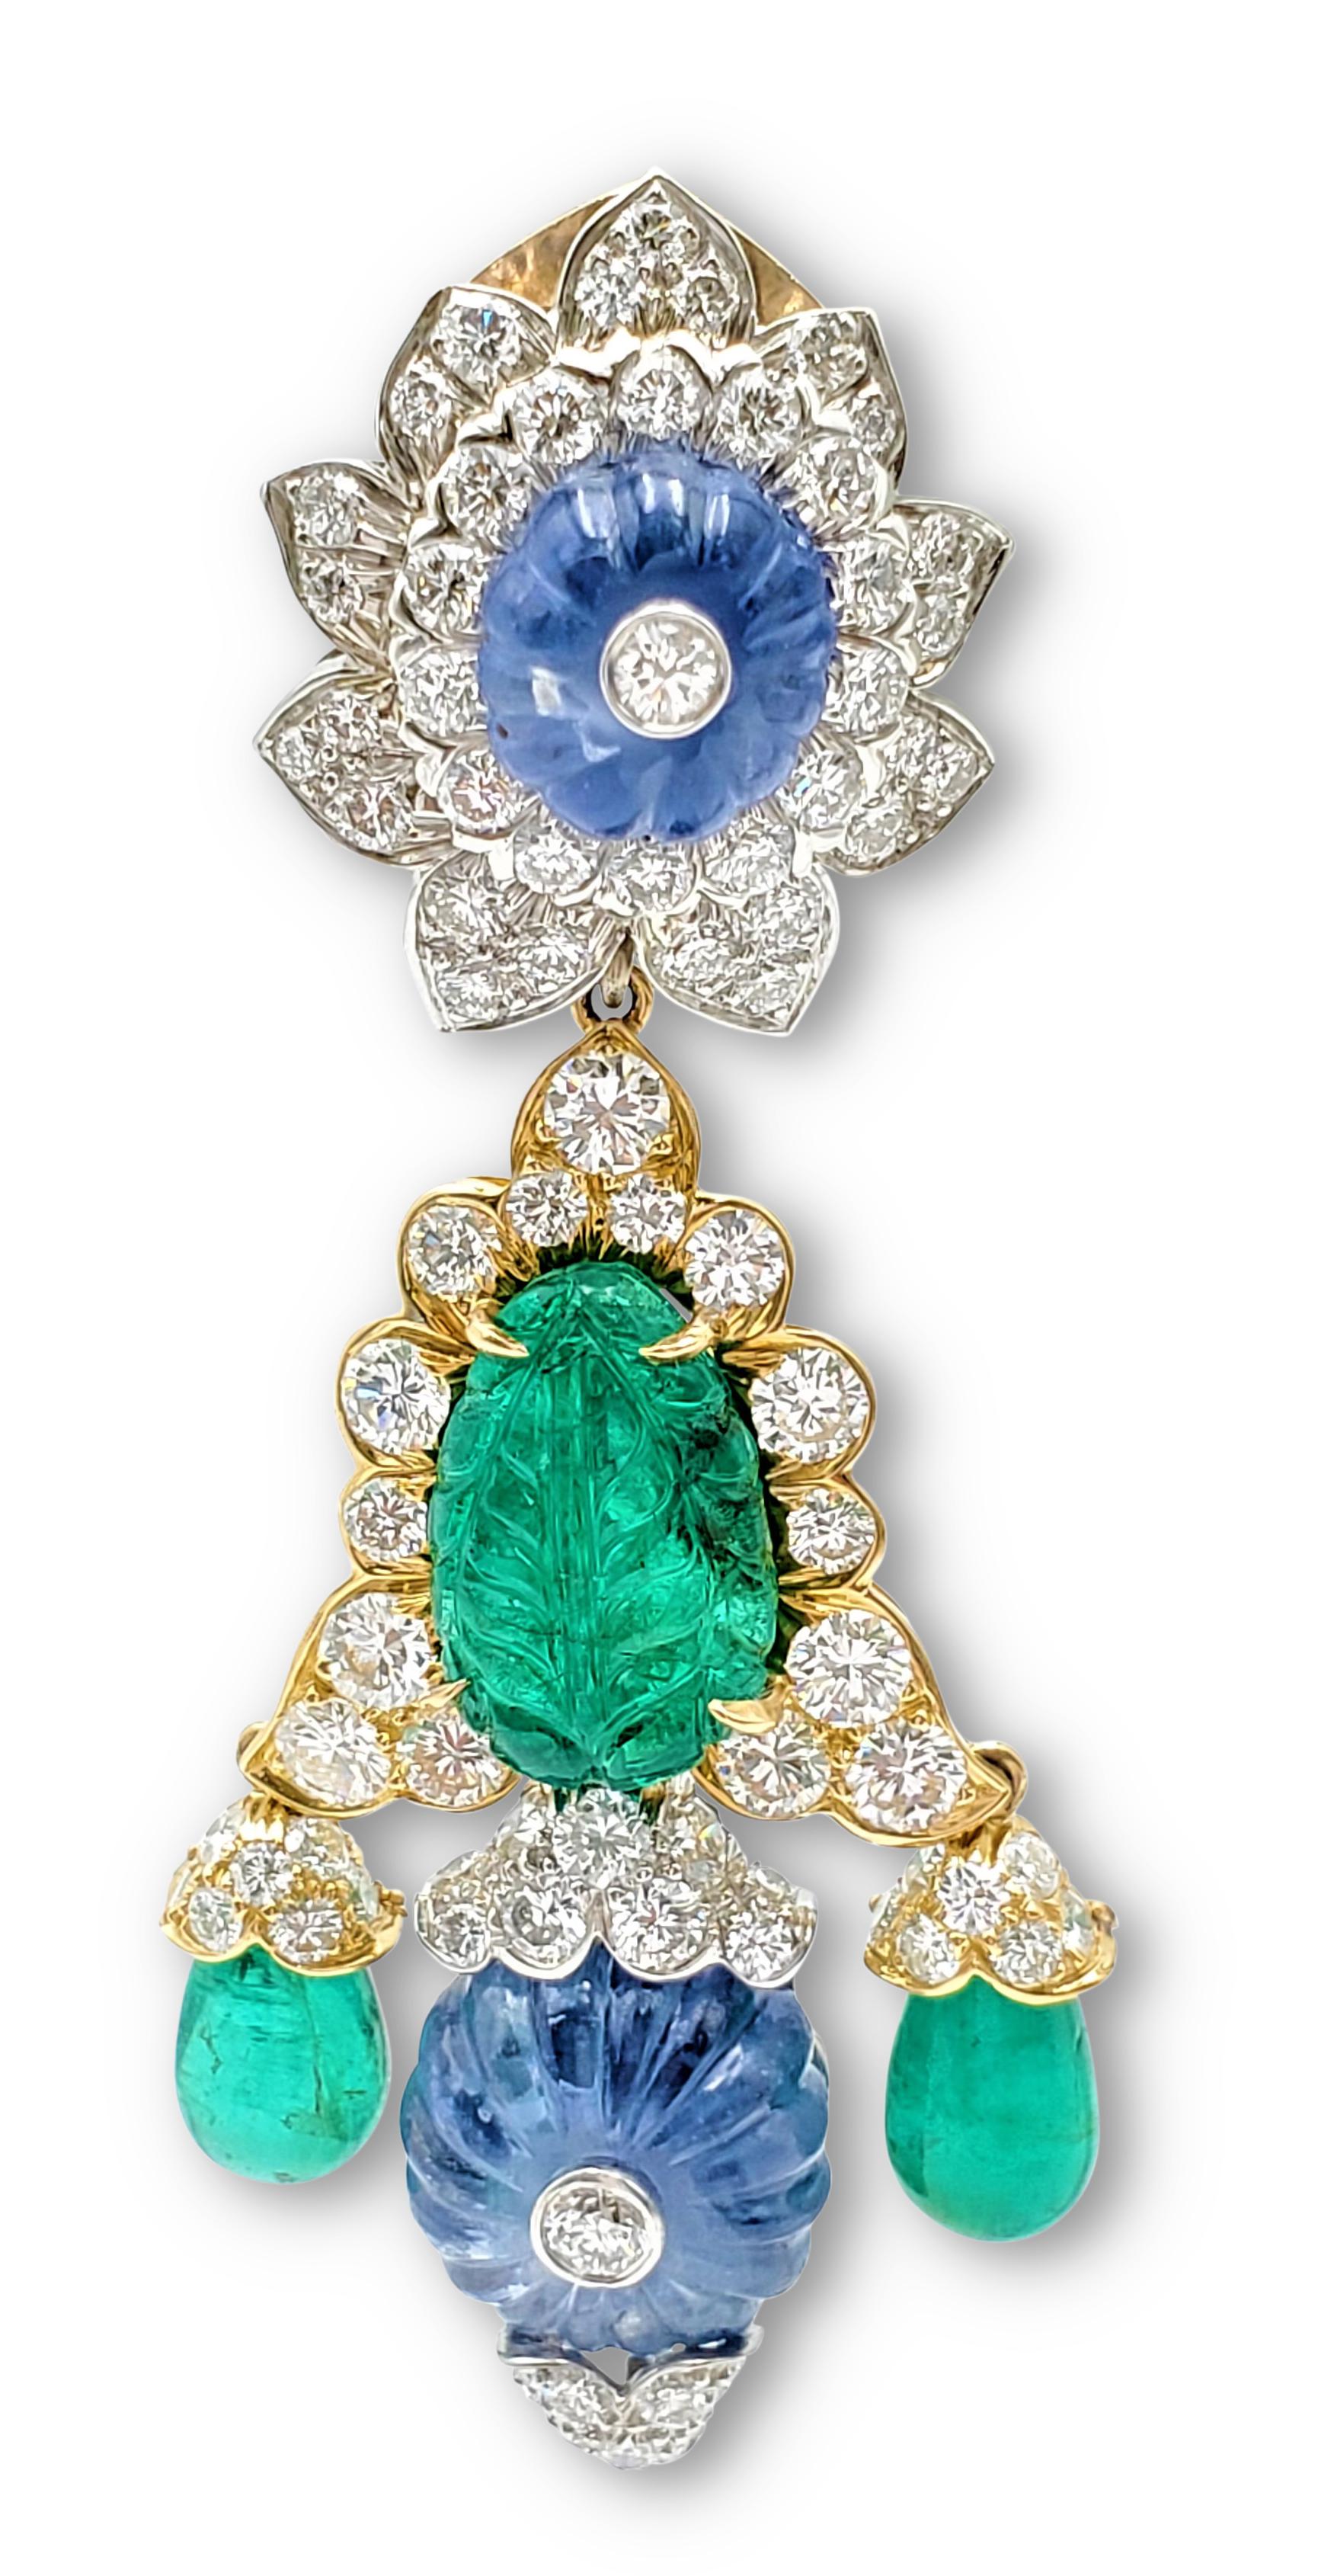 An impressive pair of earrings designed by David Webb. Easily converted from day-to-night, the earrings feature two detachable drops. Crafted in 18 karat yellow gold and platinum, the earrings center on carved emeralds, carved sapphire fluted beads,